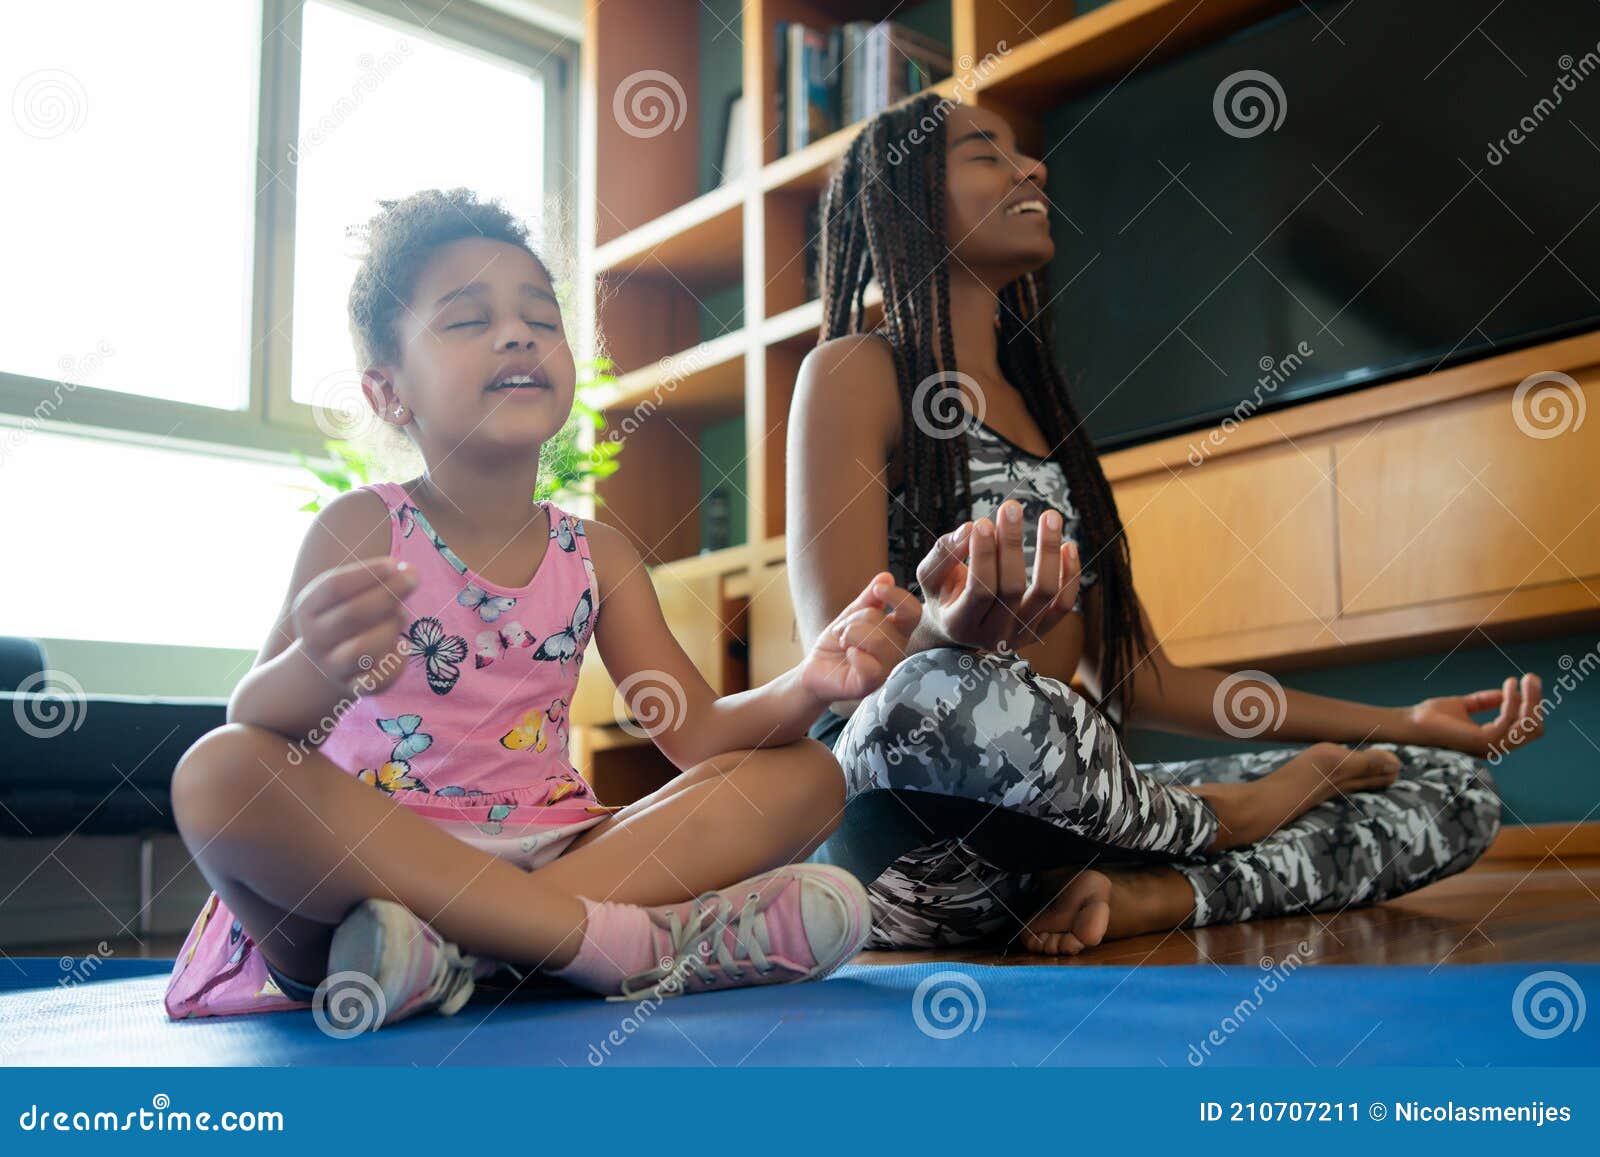 mother and daughter exercising together at home.